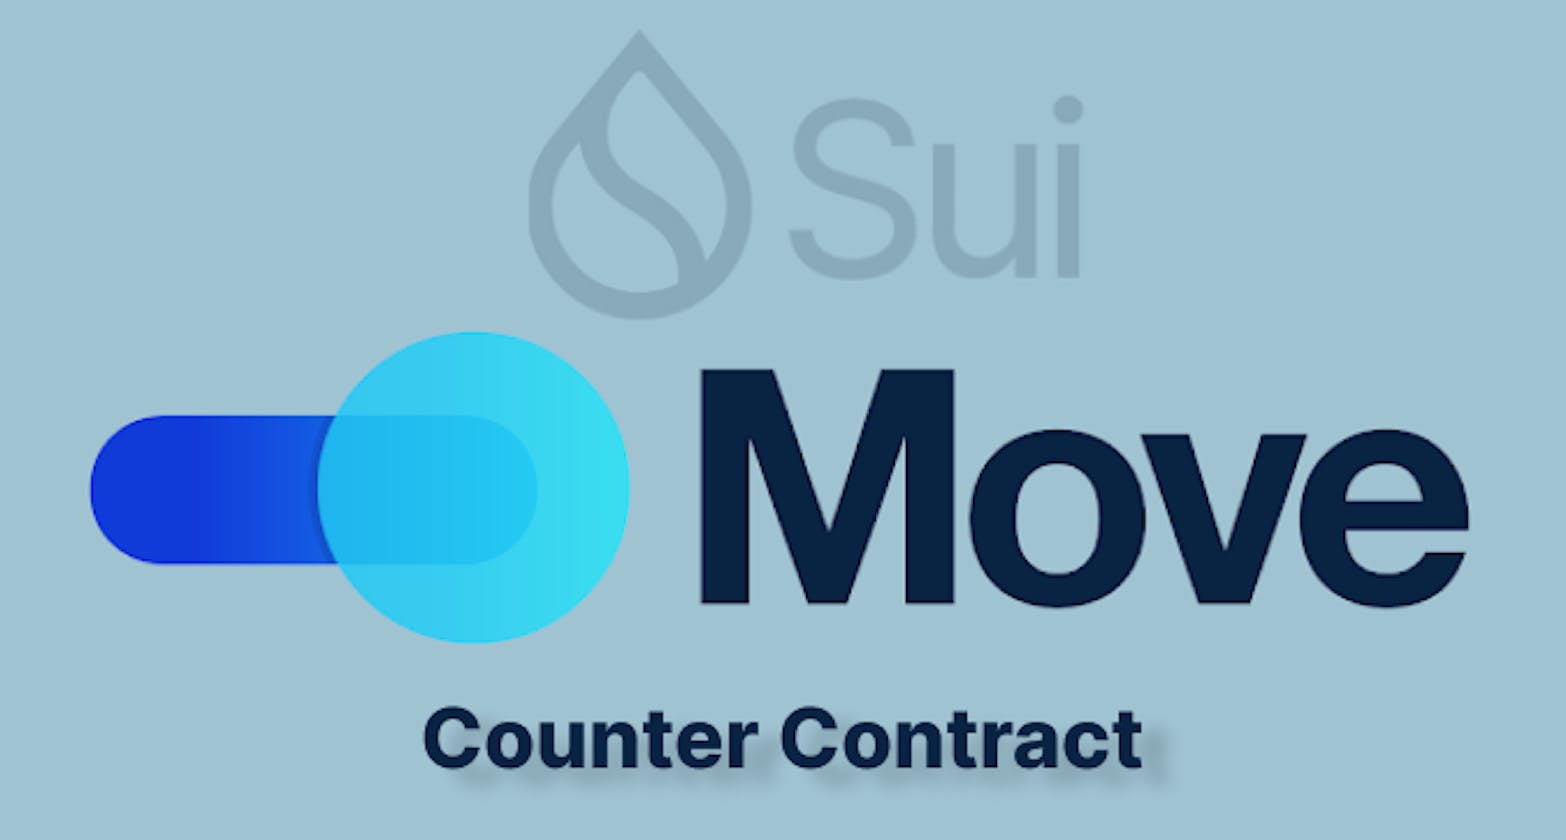 Sui Move Language - Counter Contract